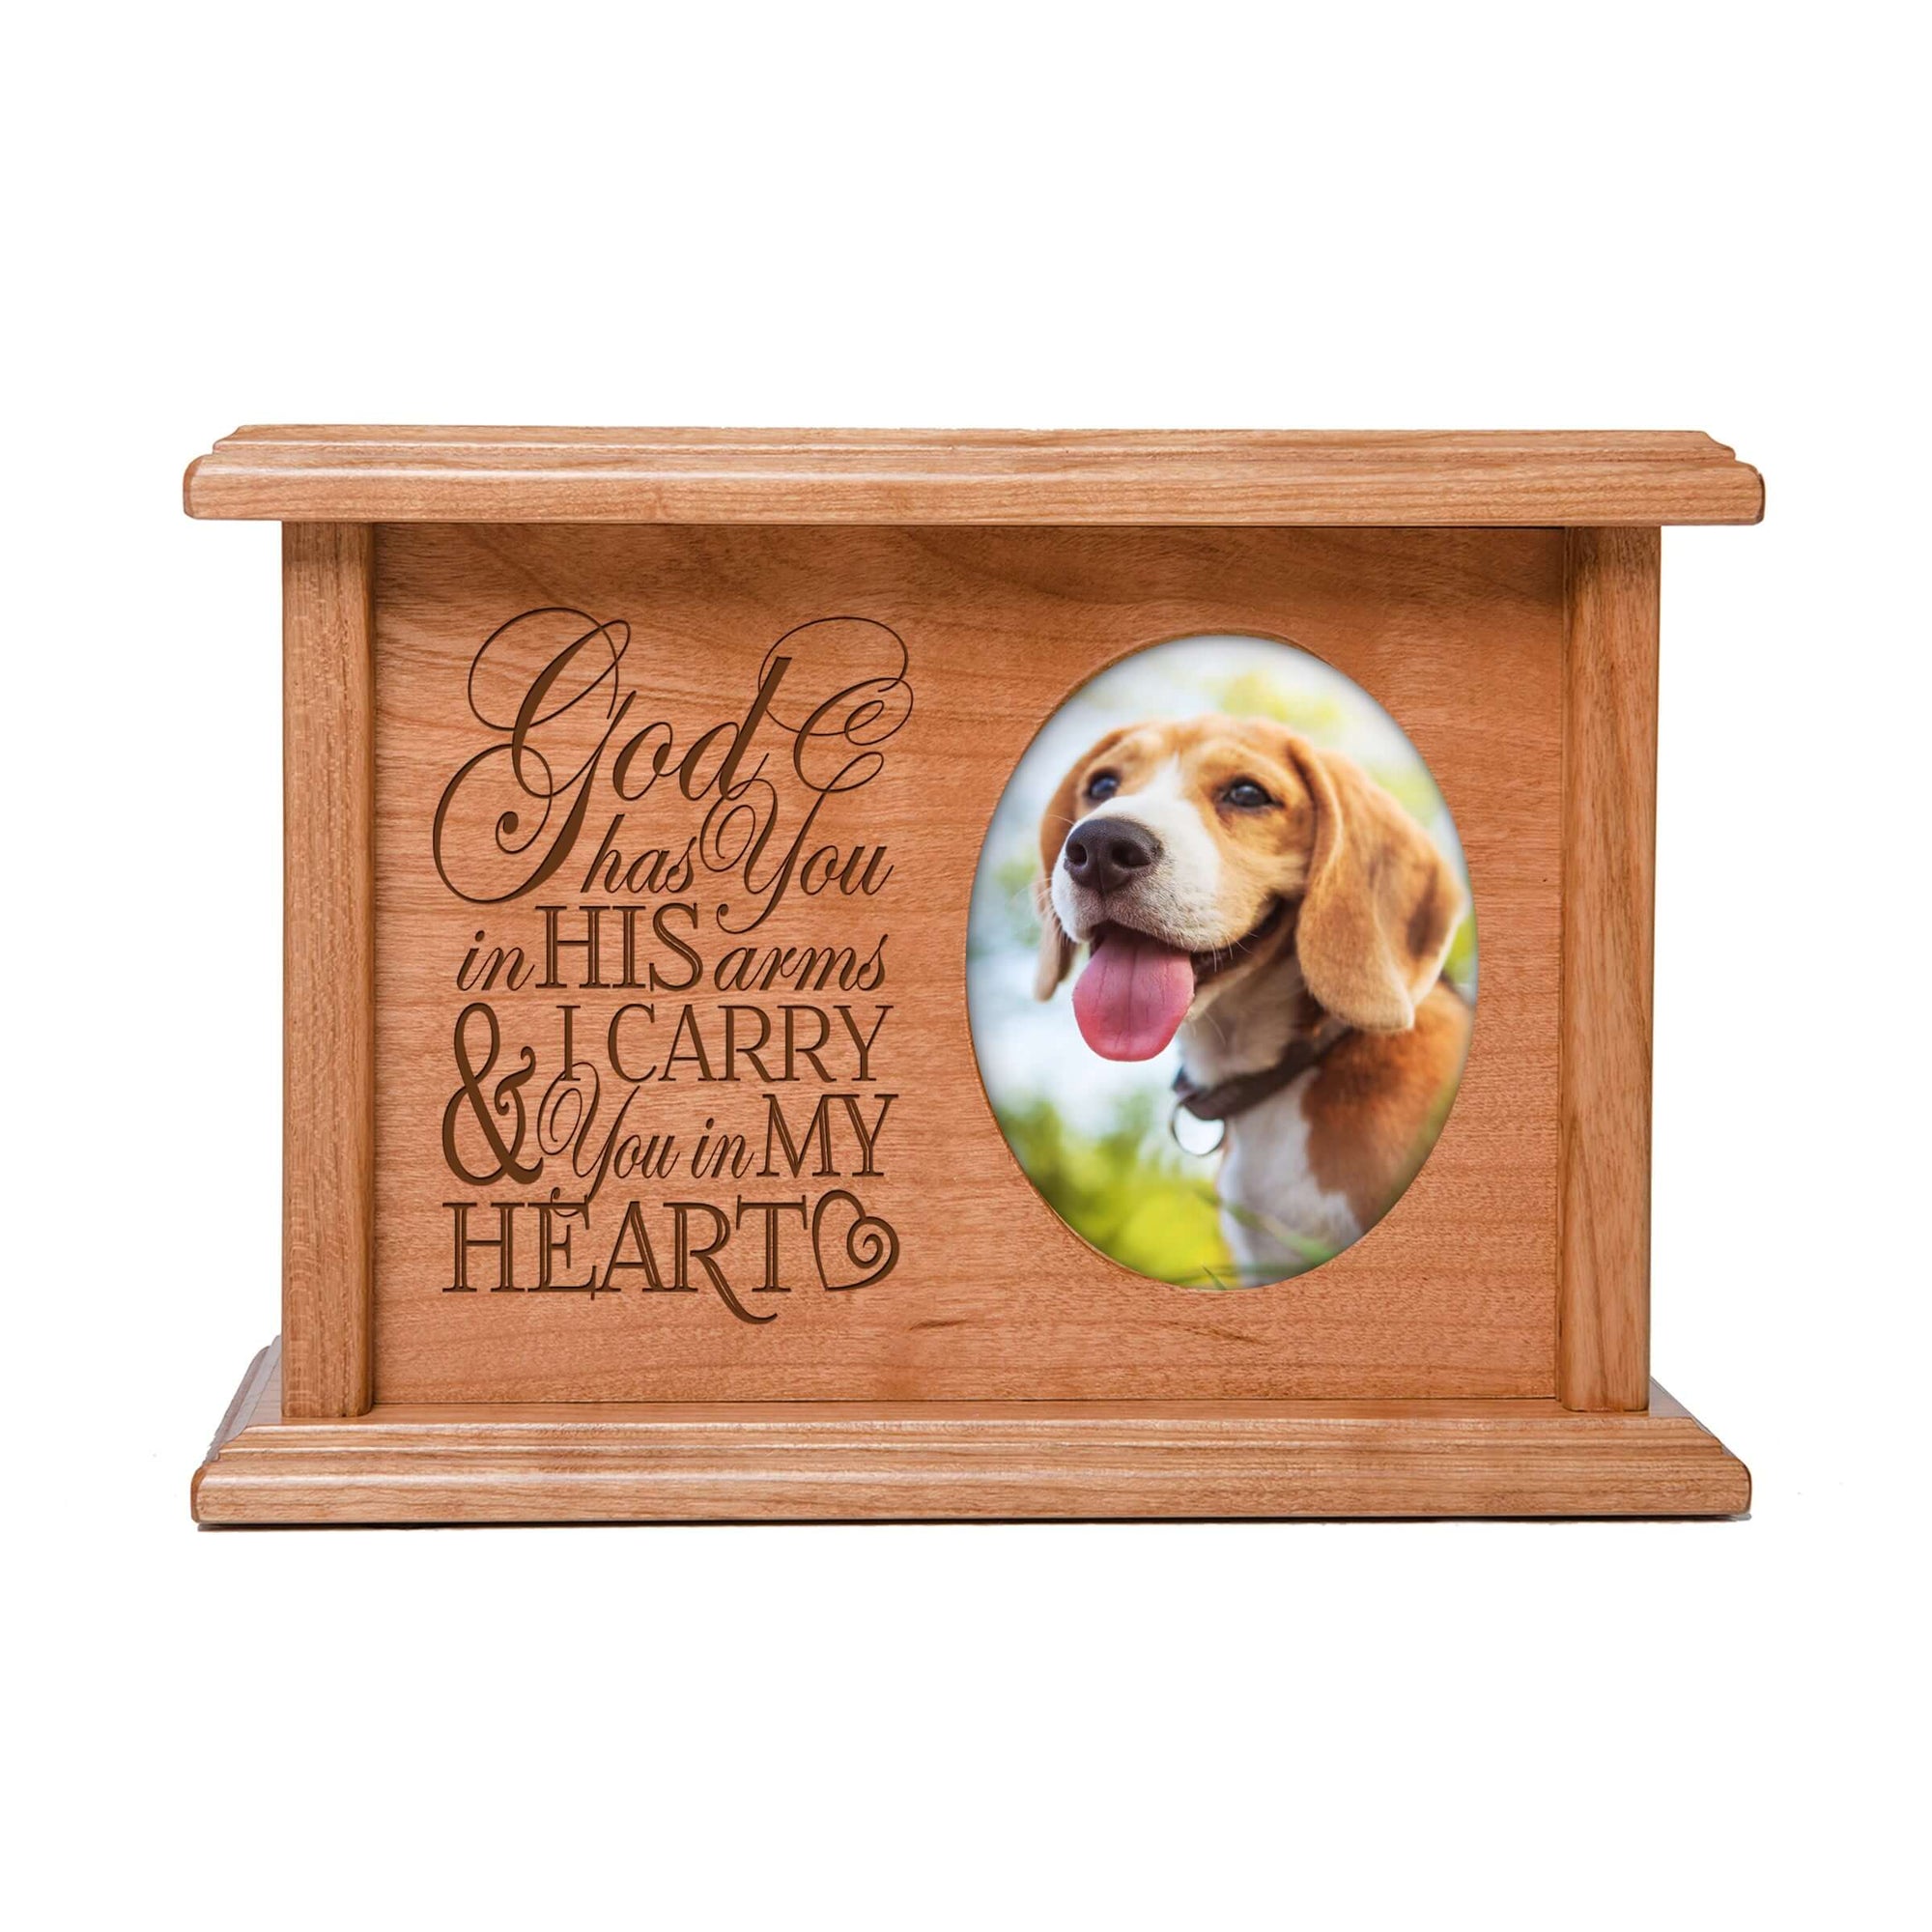 Pet Memorial Picture Cremation Urn Box for Dog or Cat - God Has You In His Arms